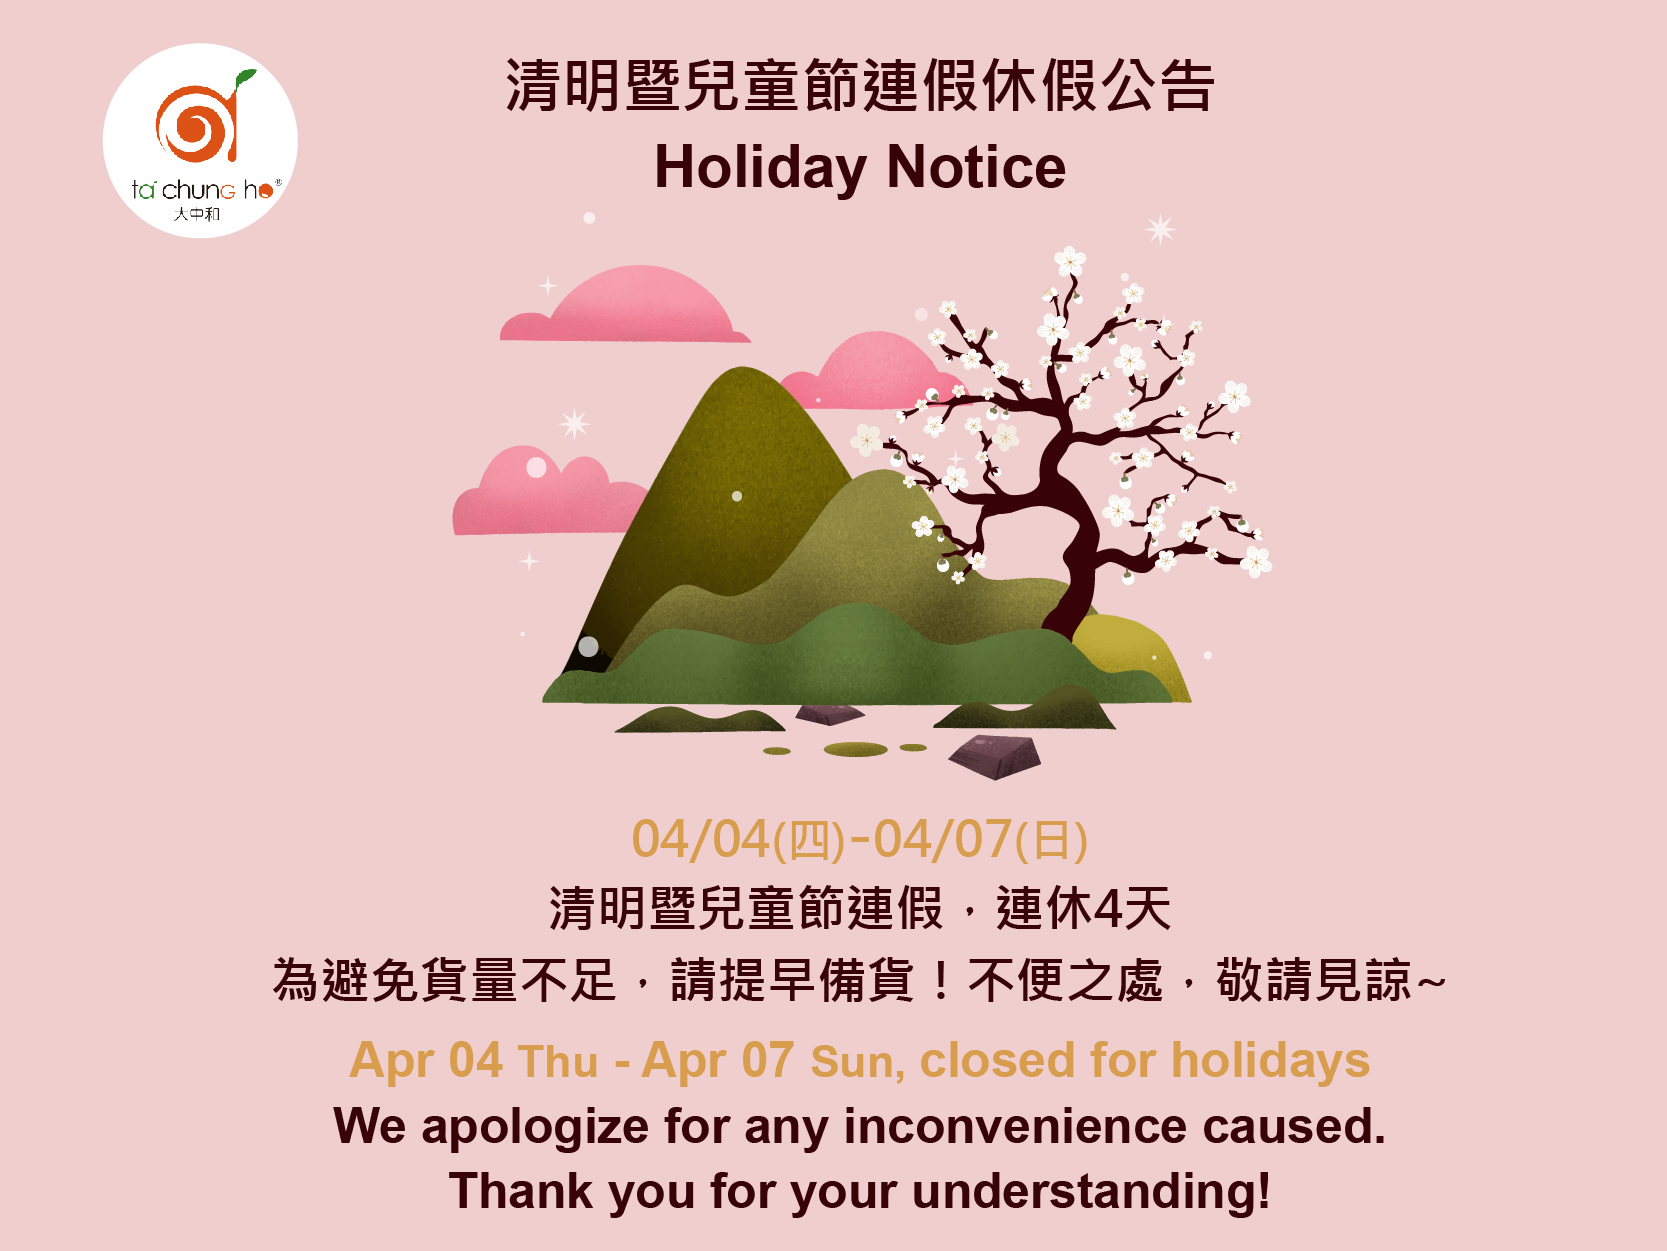 【Holiday Notice】Qingming Festival and Children's Day Holiday Notice